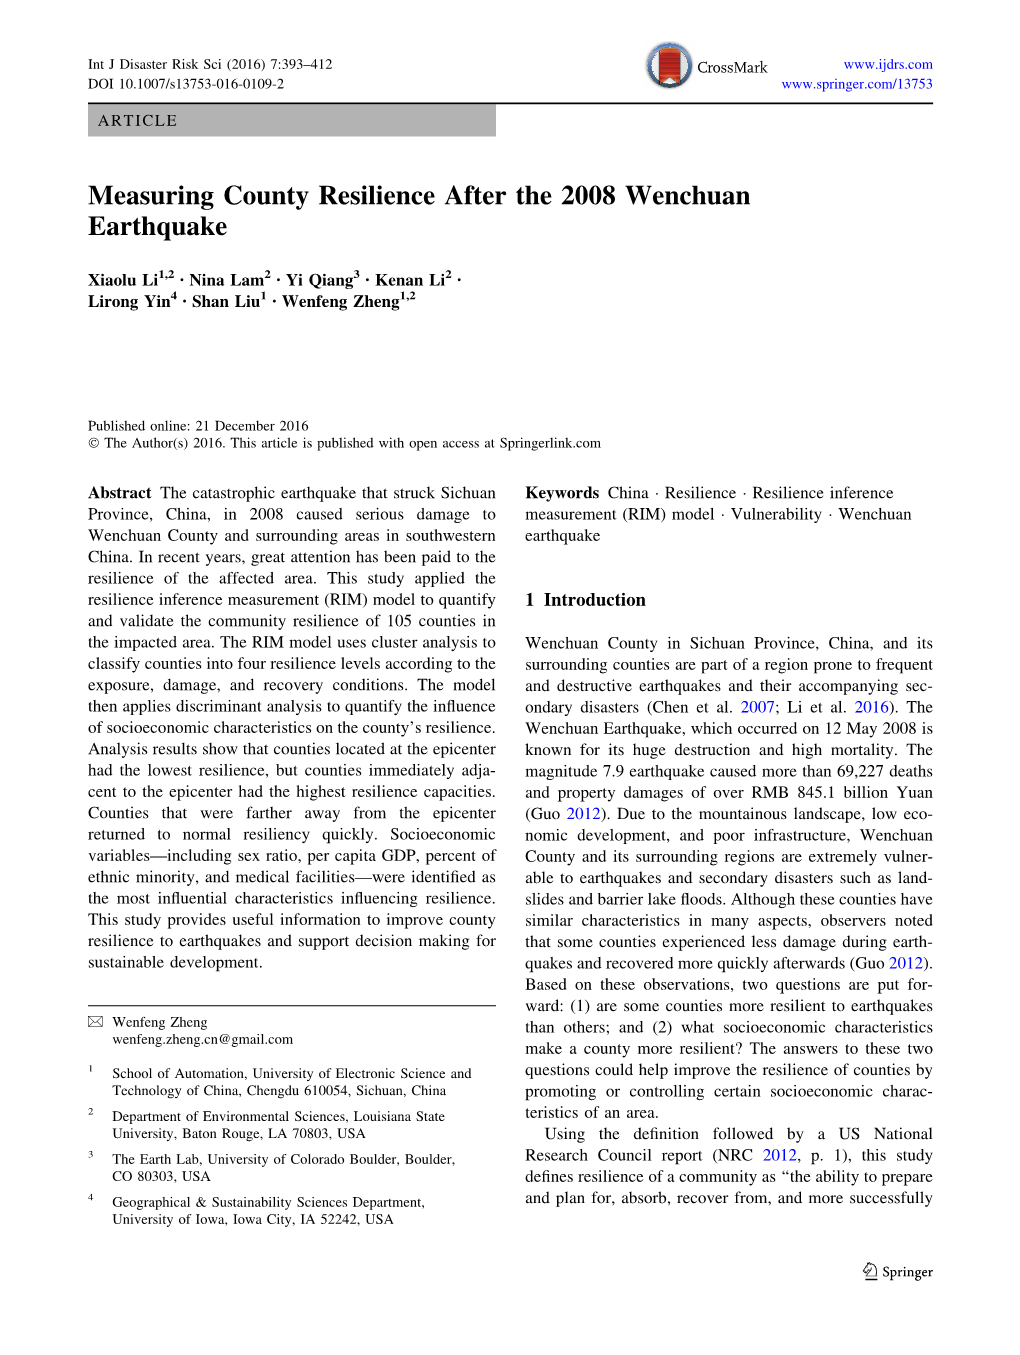 Measuring County Resilience After the 2008 Wenchuan Earthquake